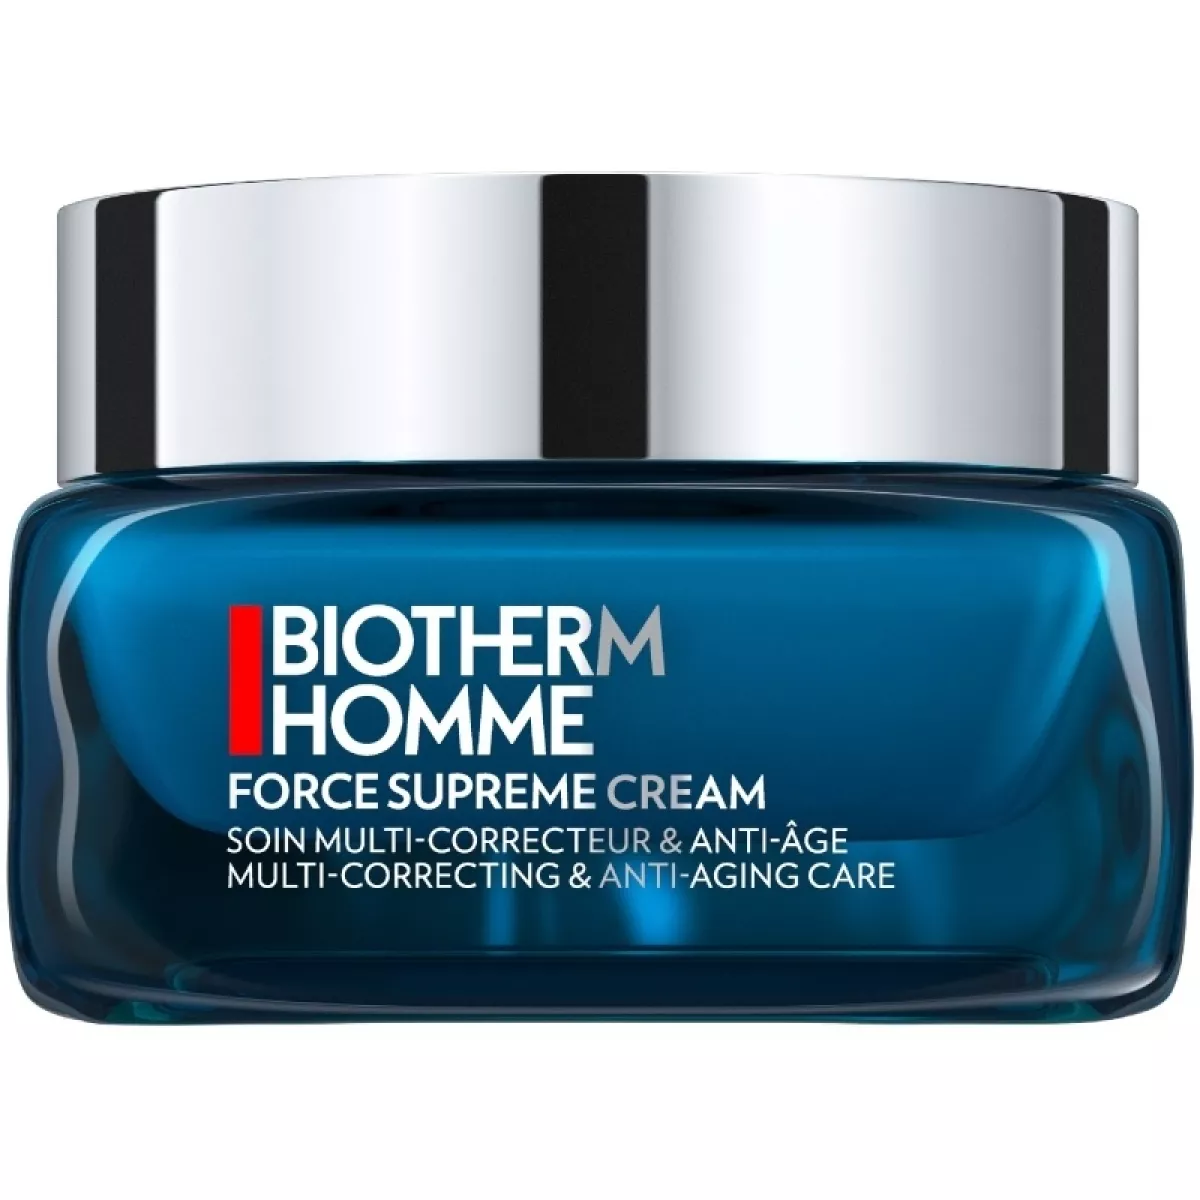 #2 - Biotherm Homme Force Supreme Cream 50 ml